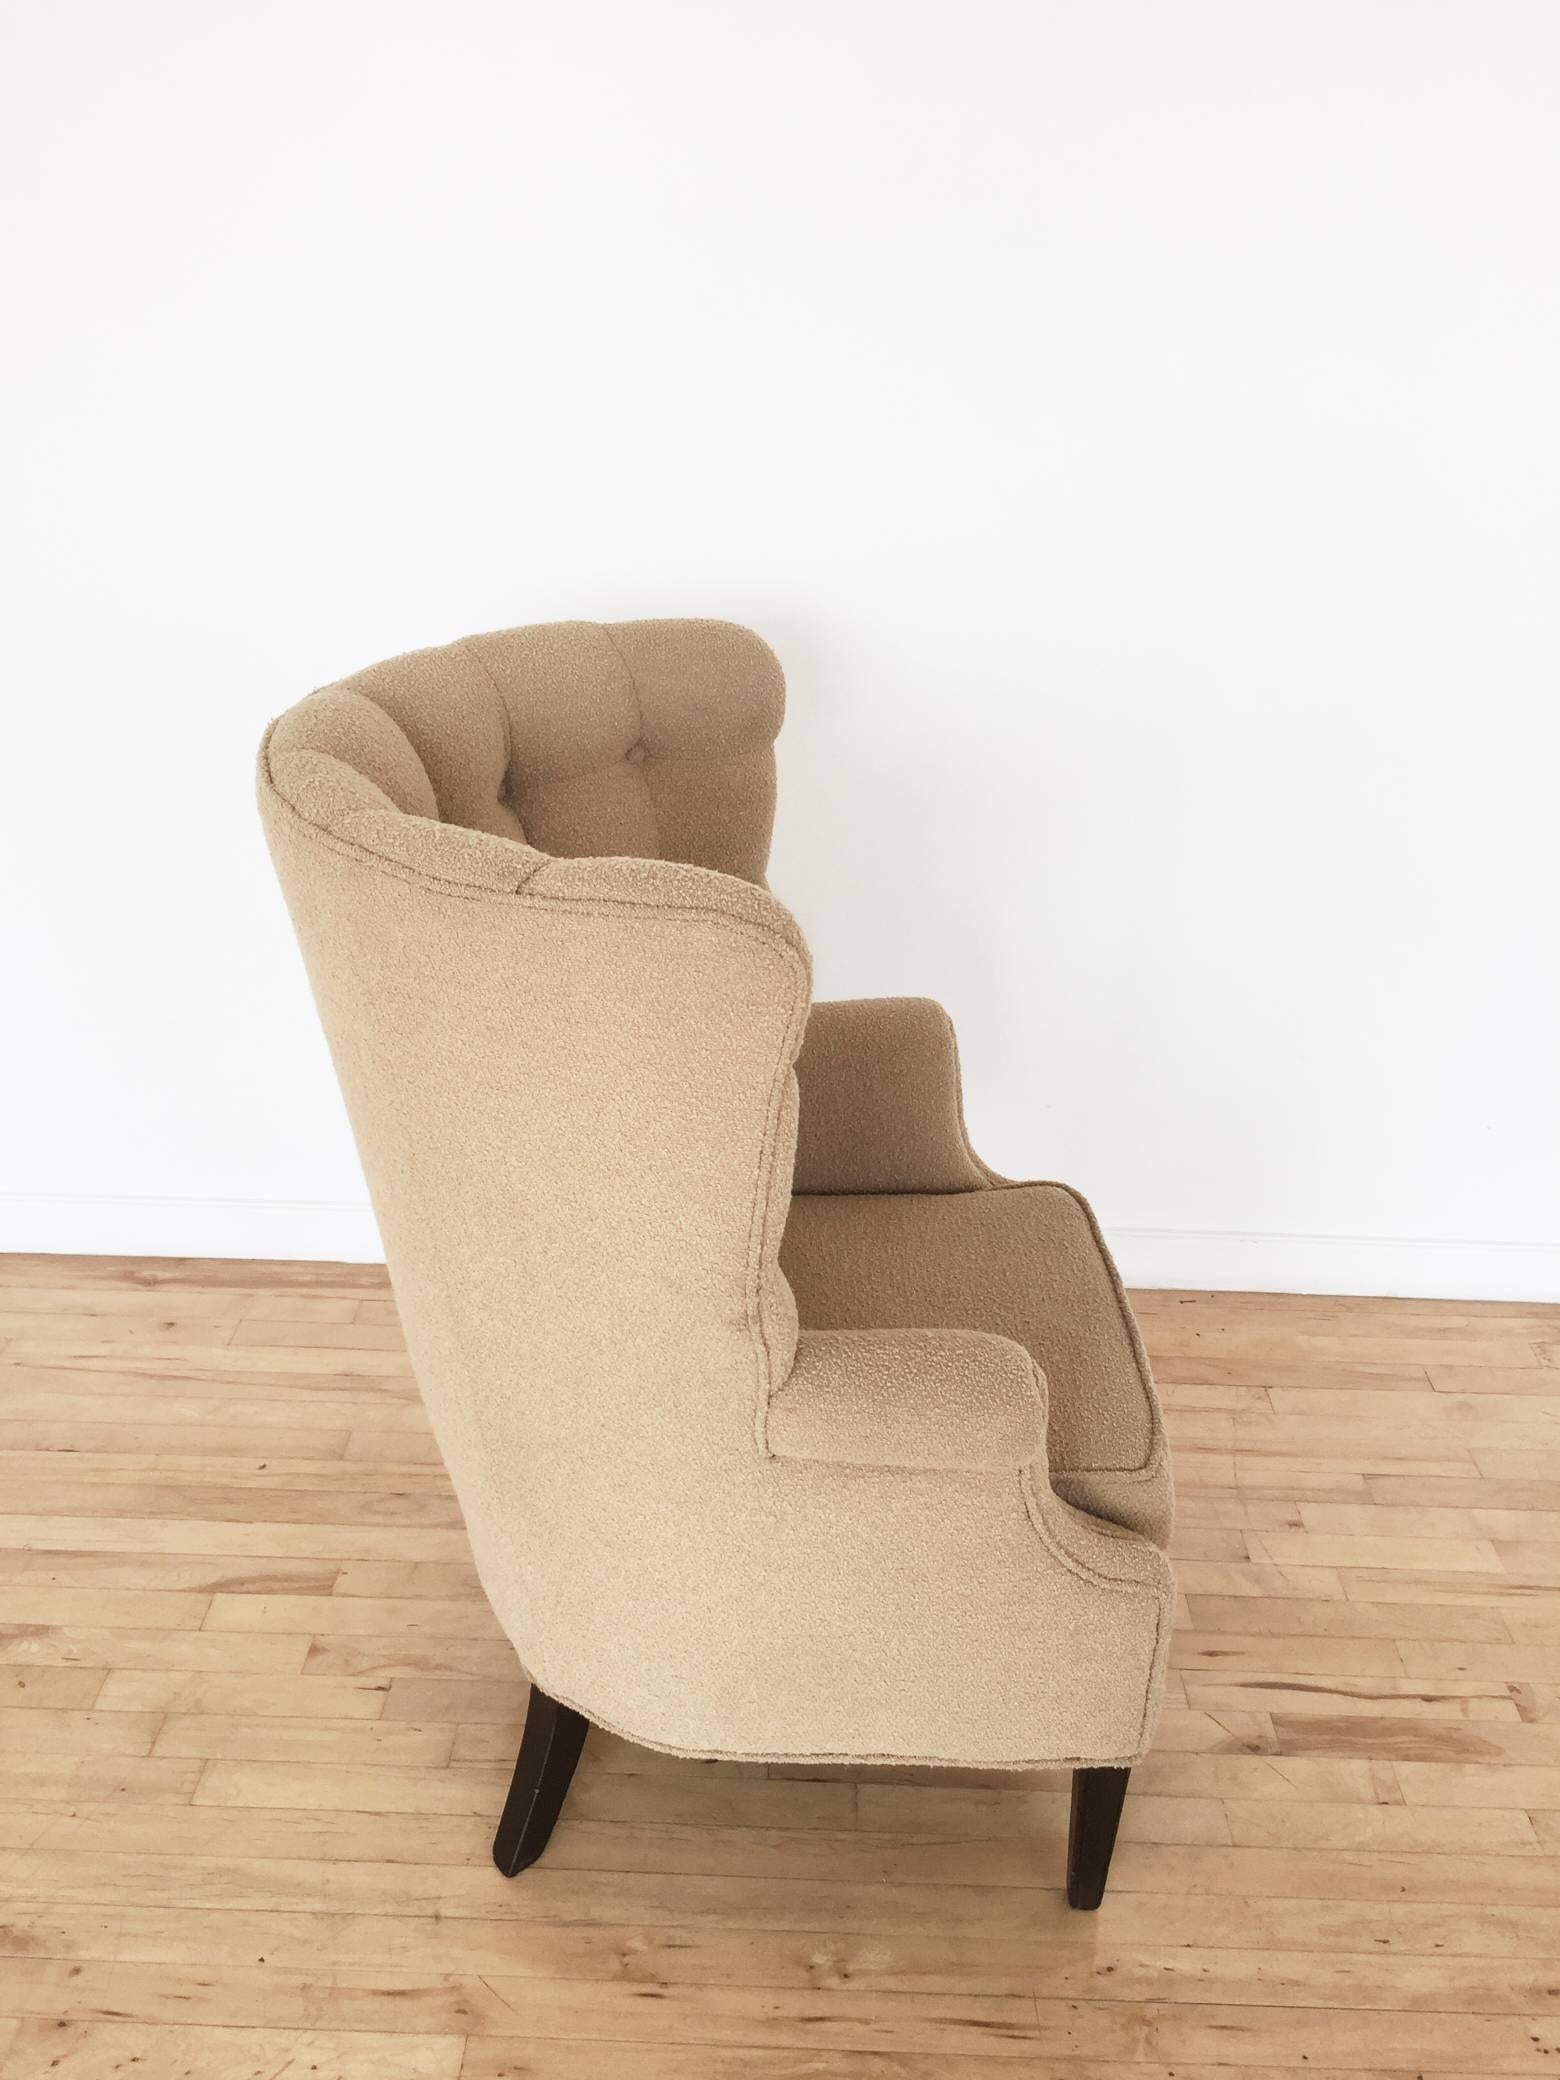 Mid-20th Century Modernist Mid-Century High Back Tufted Club Chair, 1960s